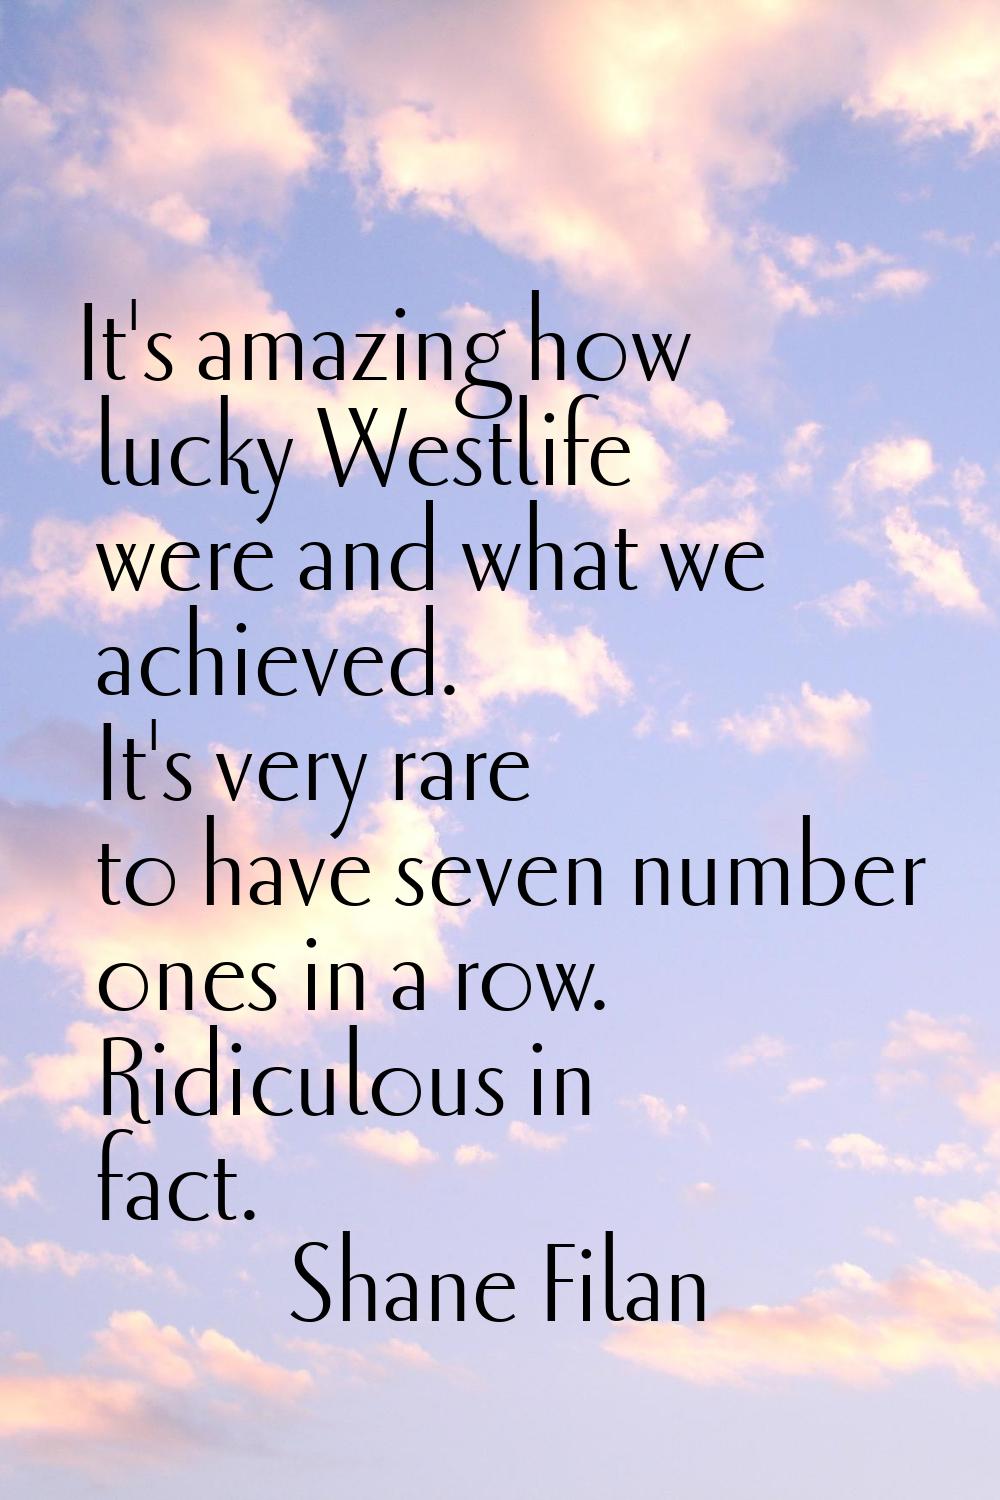 It's amazing how lucky Westlife were and what we achieved. It's very rare to have seven number ones